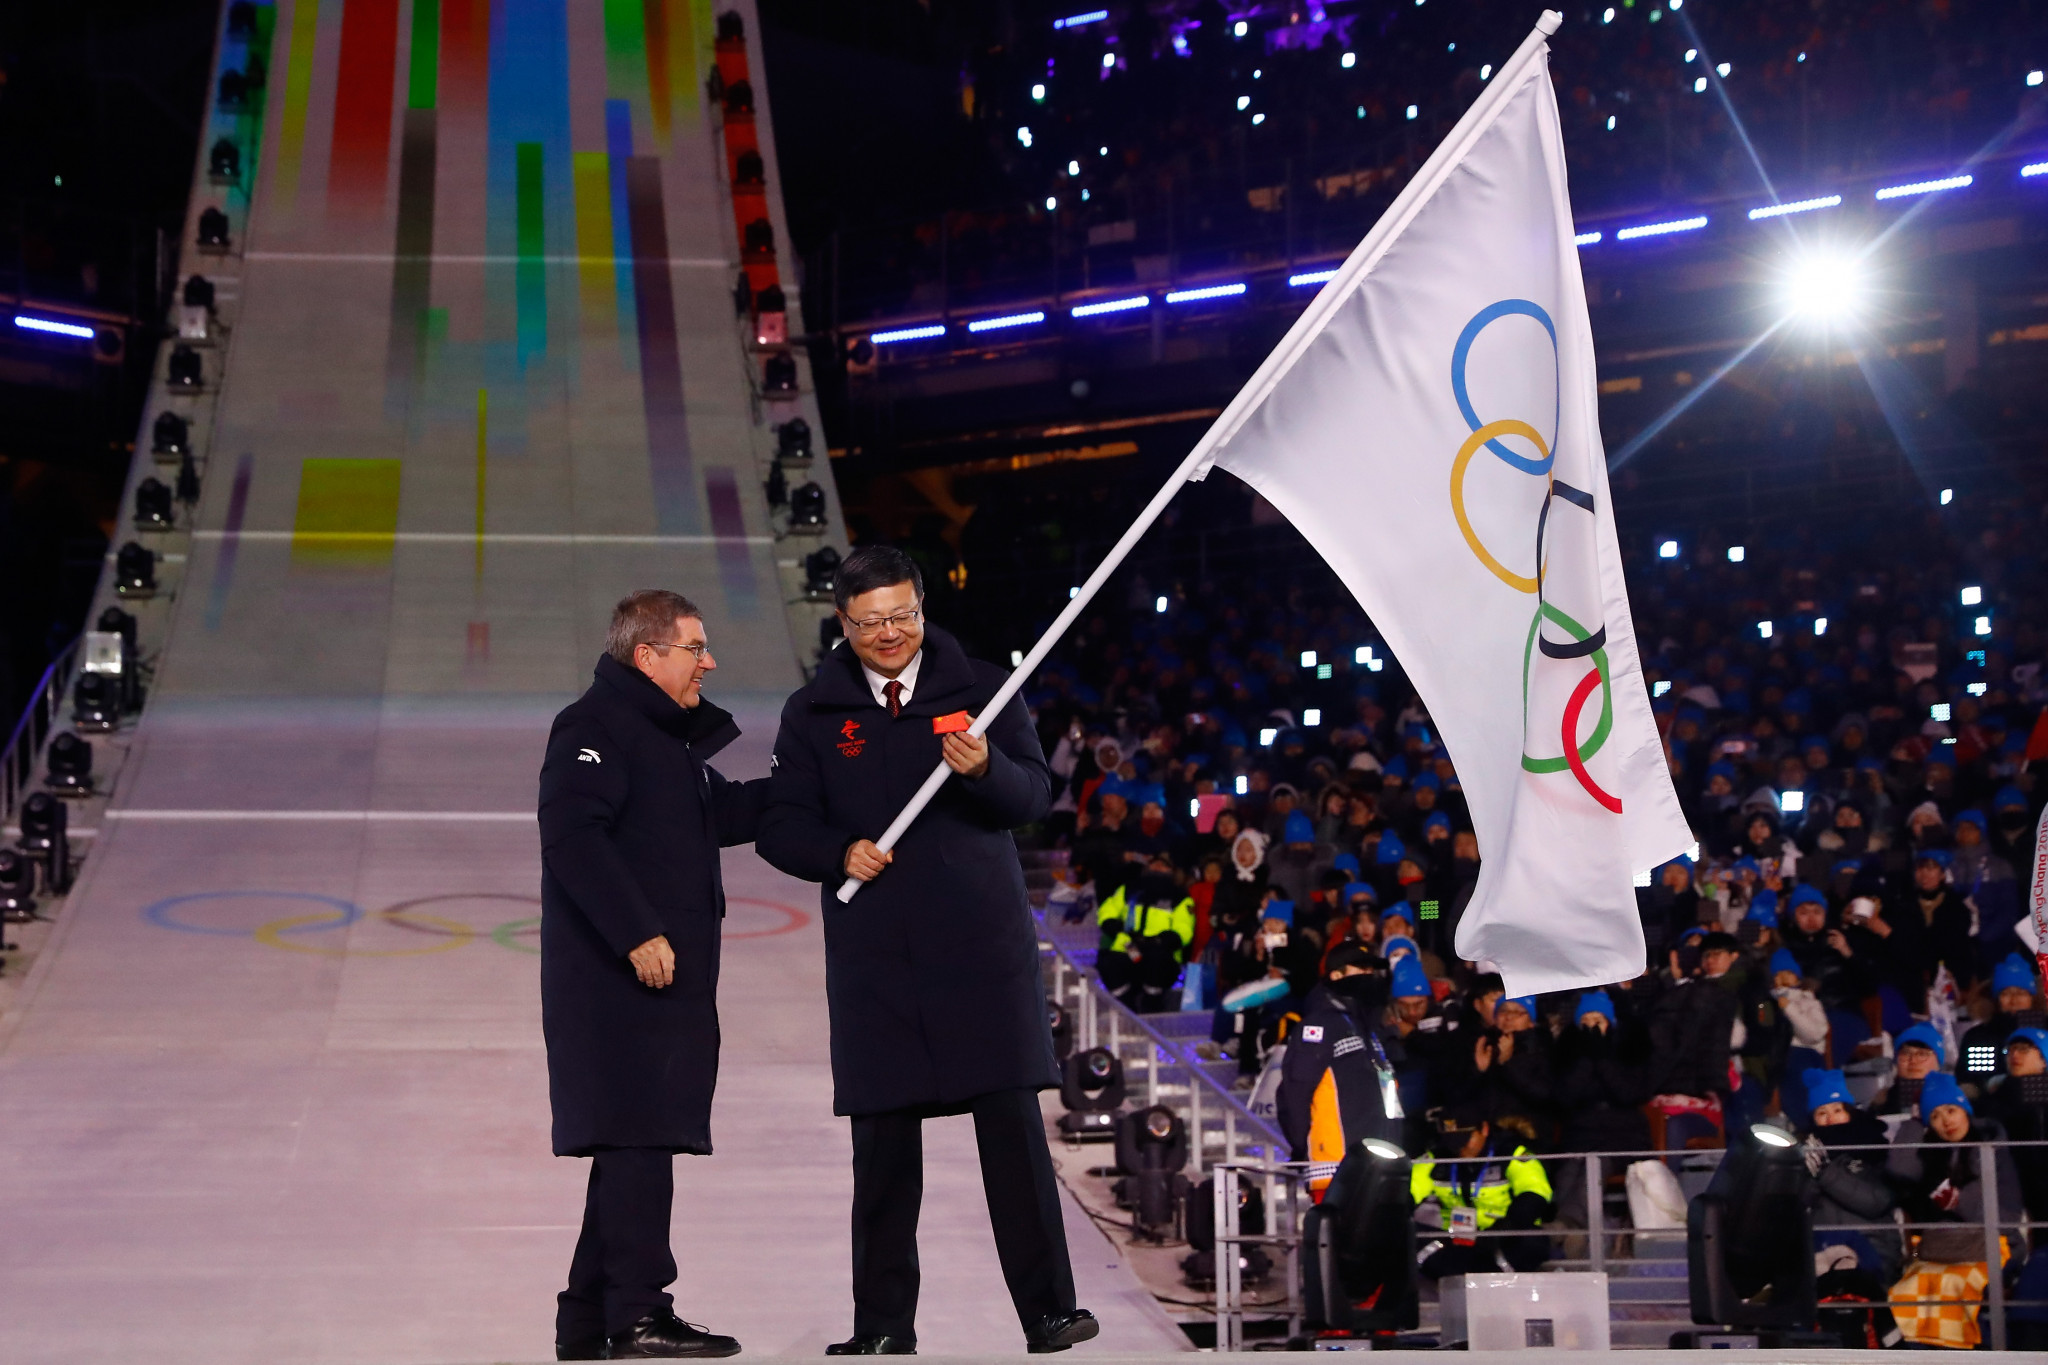 Beijing 2022 received the Ceremonial Olympic Flag from IOC President Thomas Bach at the Closing Ceremony in Pyeonchang four years ago ©Getty Images